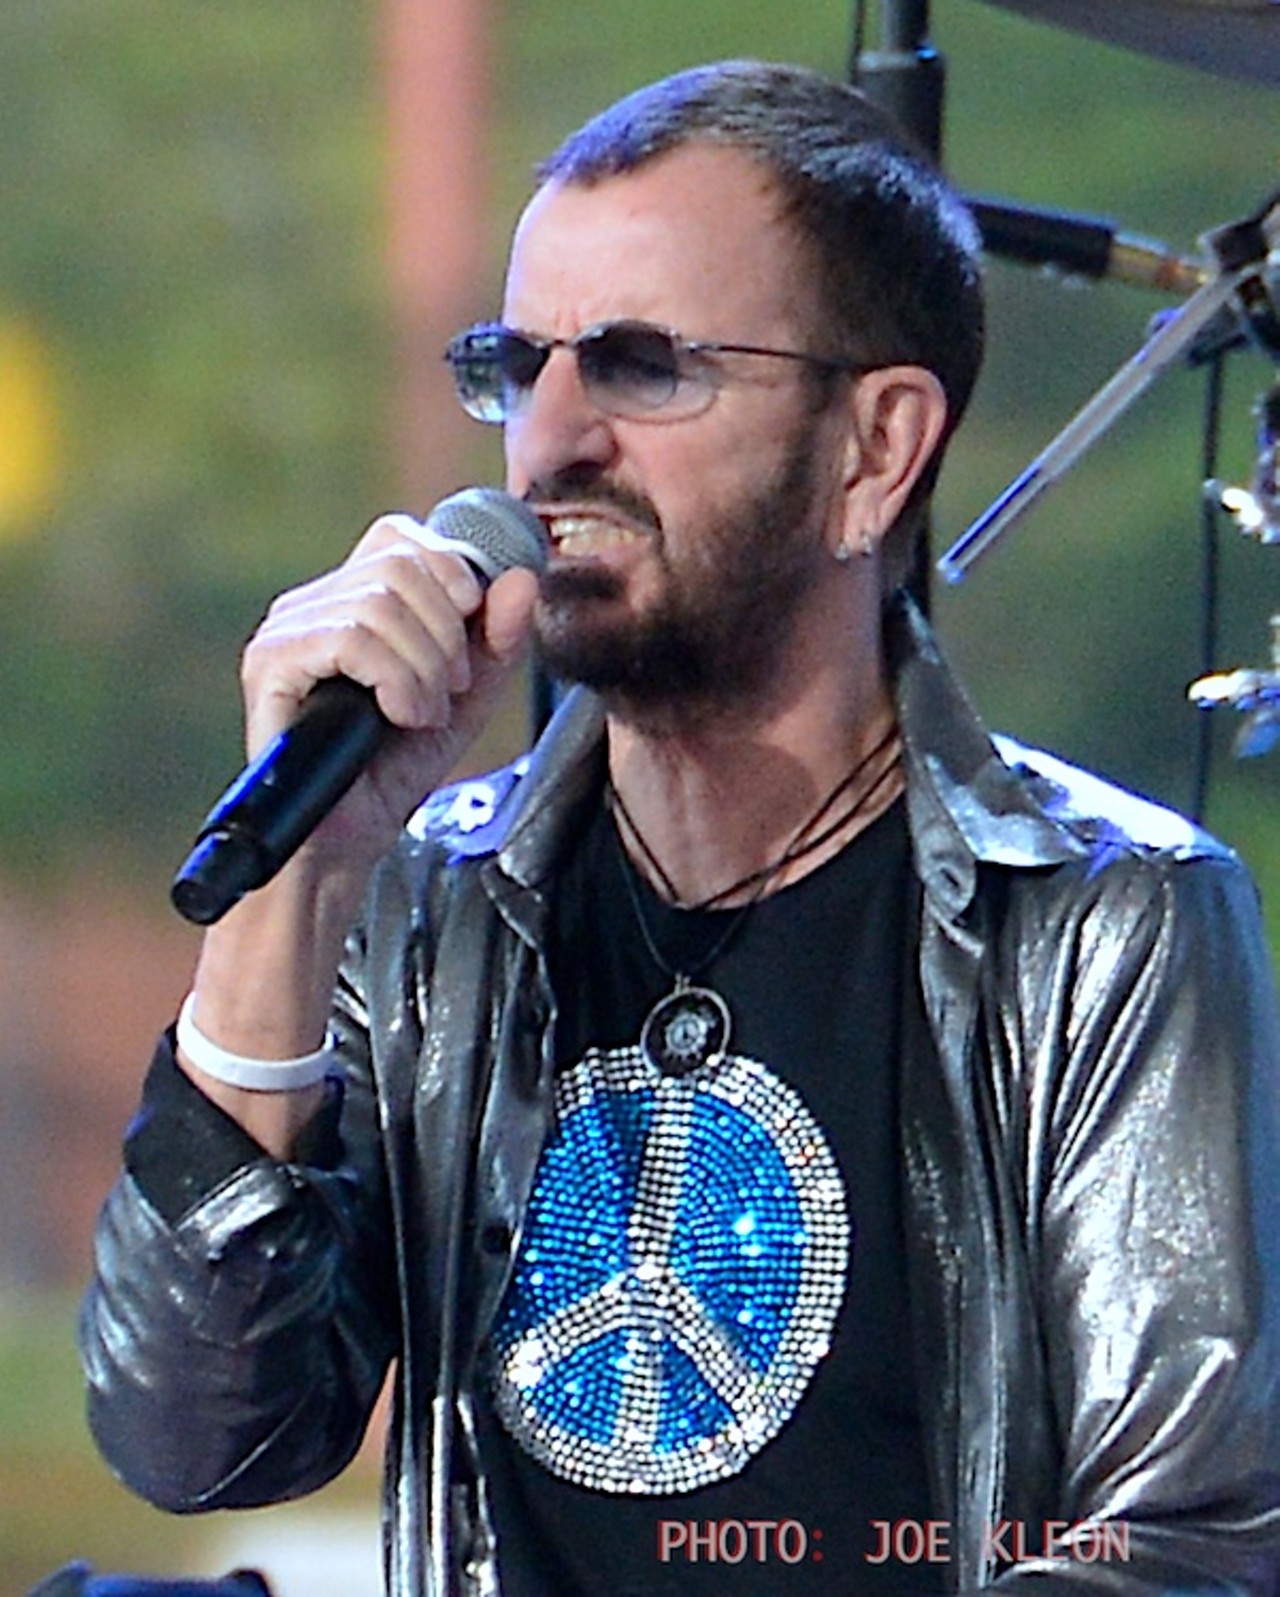 Ringo Starr & HIs All-Starr Band Performing at Jacobs Pavilion at Nautica